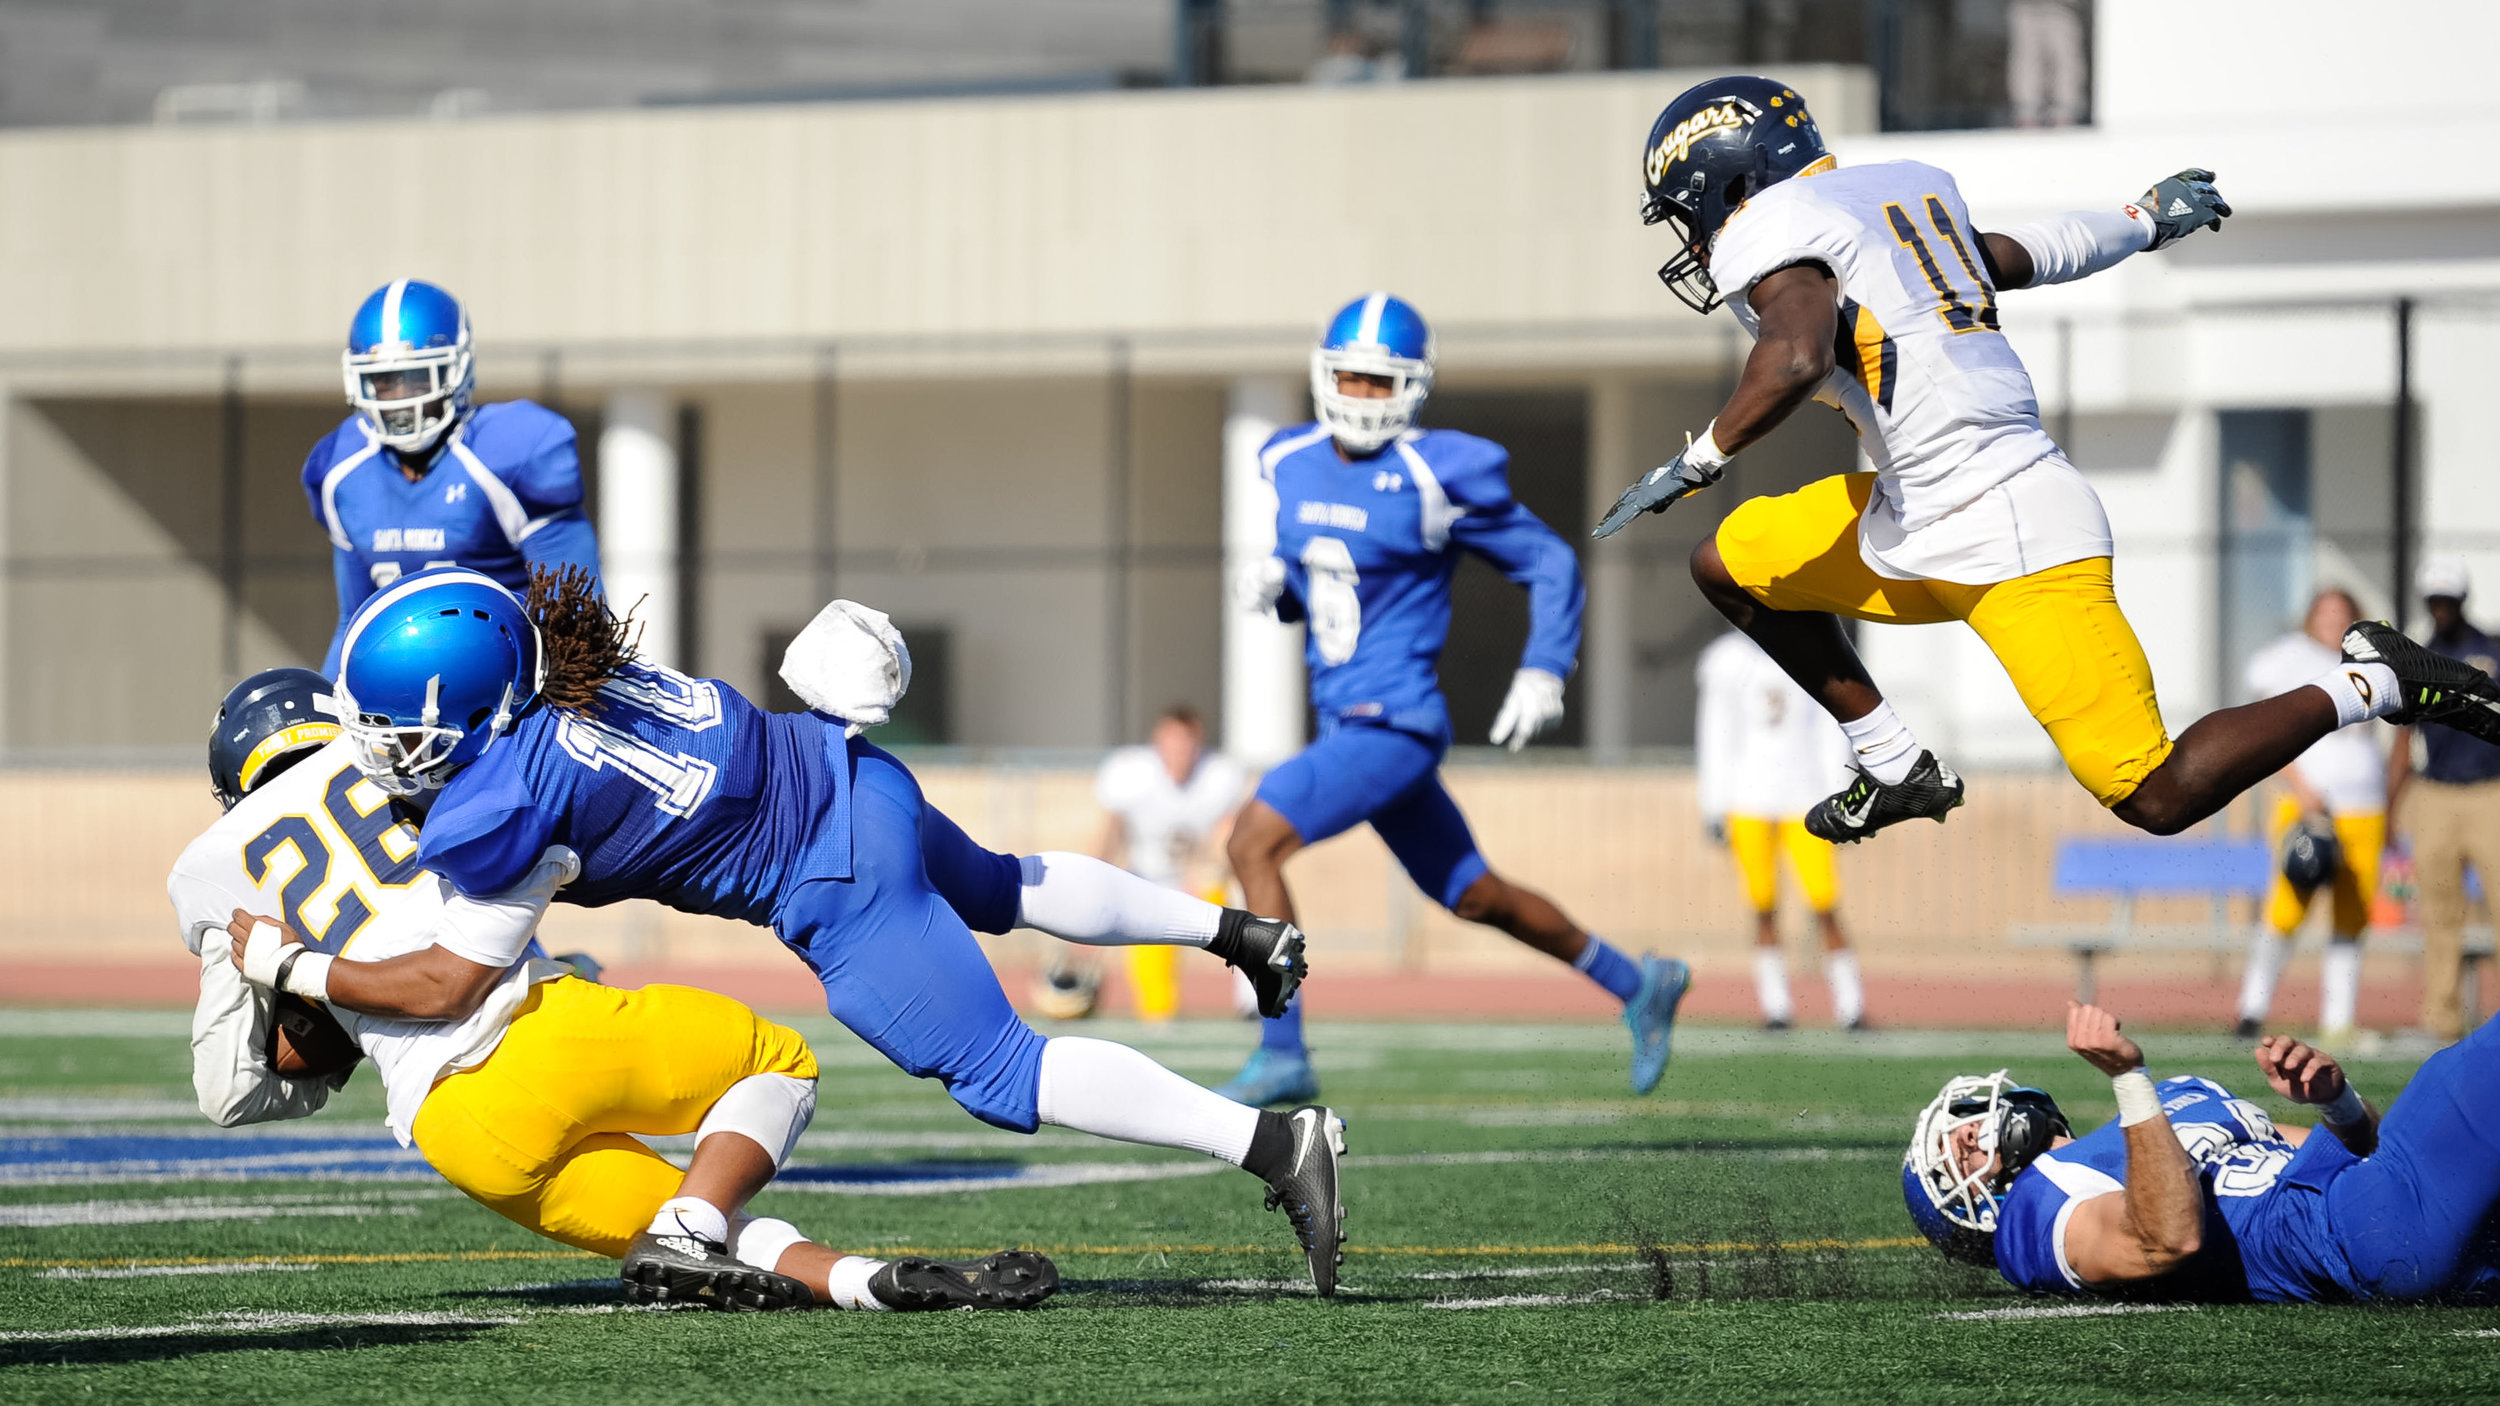  Linebacker Devin Cox (10,Middle) of Santa Monica College tackles running back Jalen Logan (26,Middle) of College of the Canyons ending the play. The Santa Monica College Corsairs lose their final home game 7-48 to the College of the Canyons Cougars 